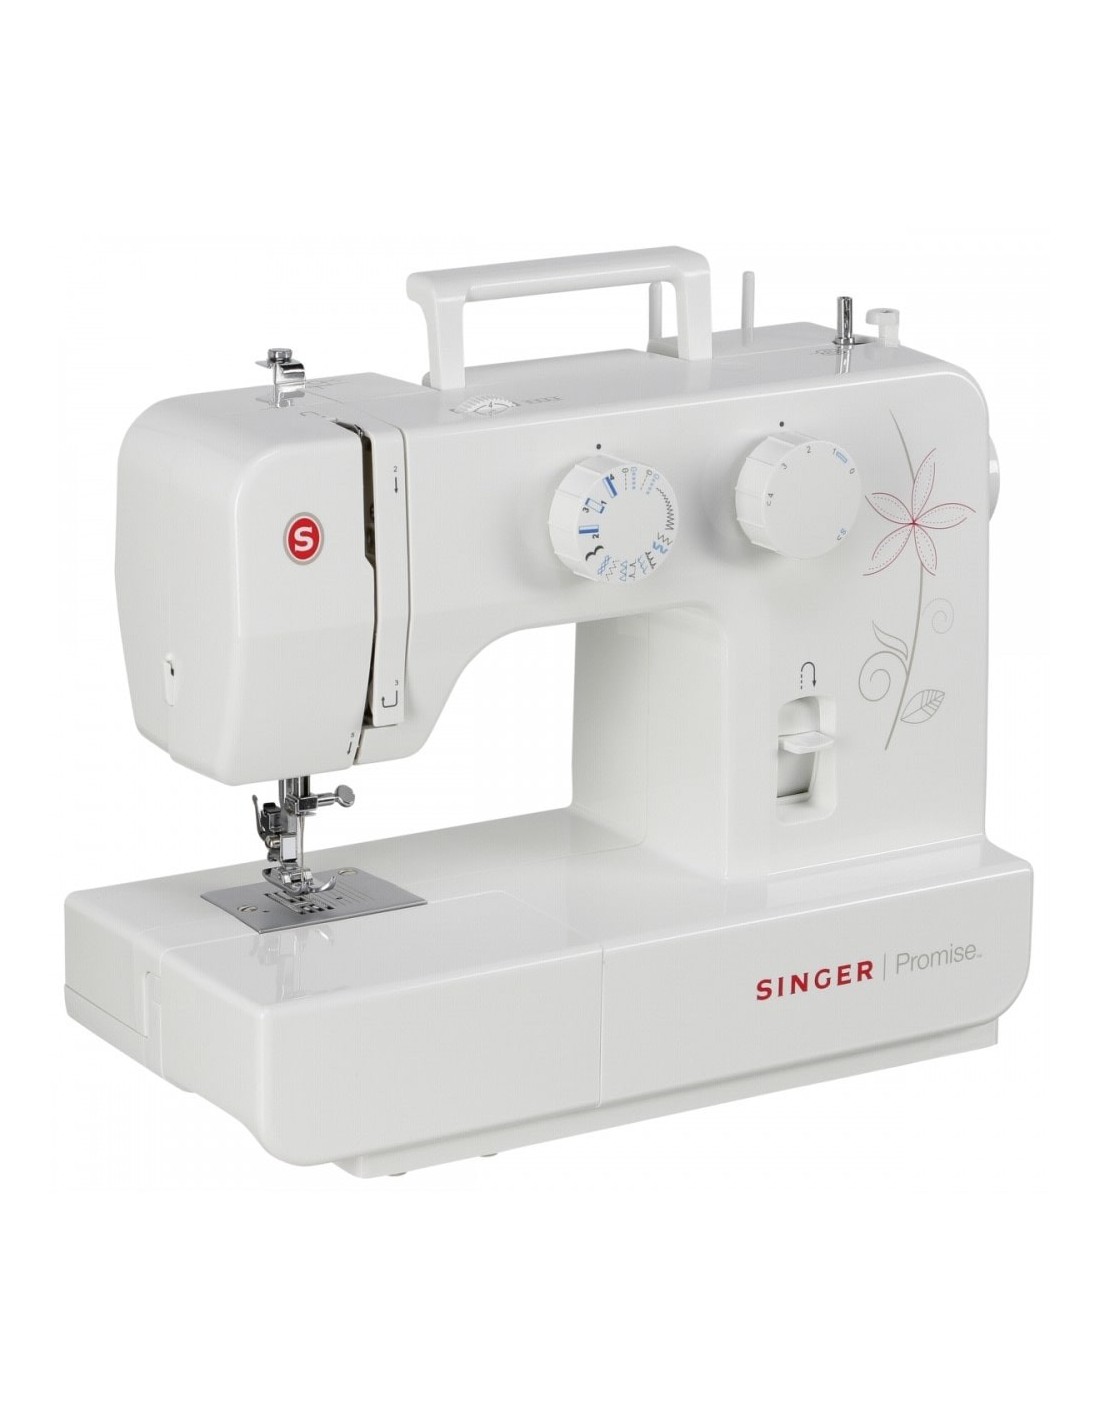 Defeated larynx View the Internet Singer Promise 1412 Cheap Sewing Machine with Stretch Stitches